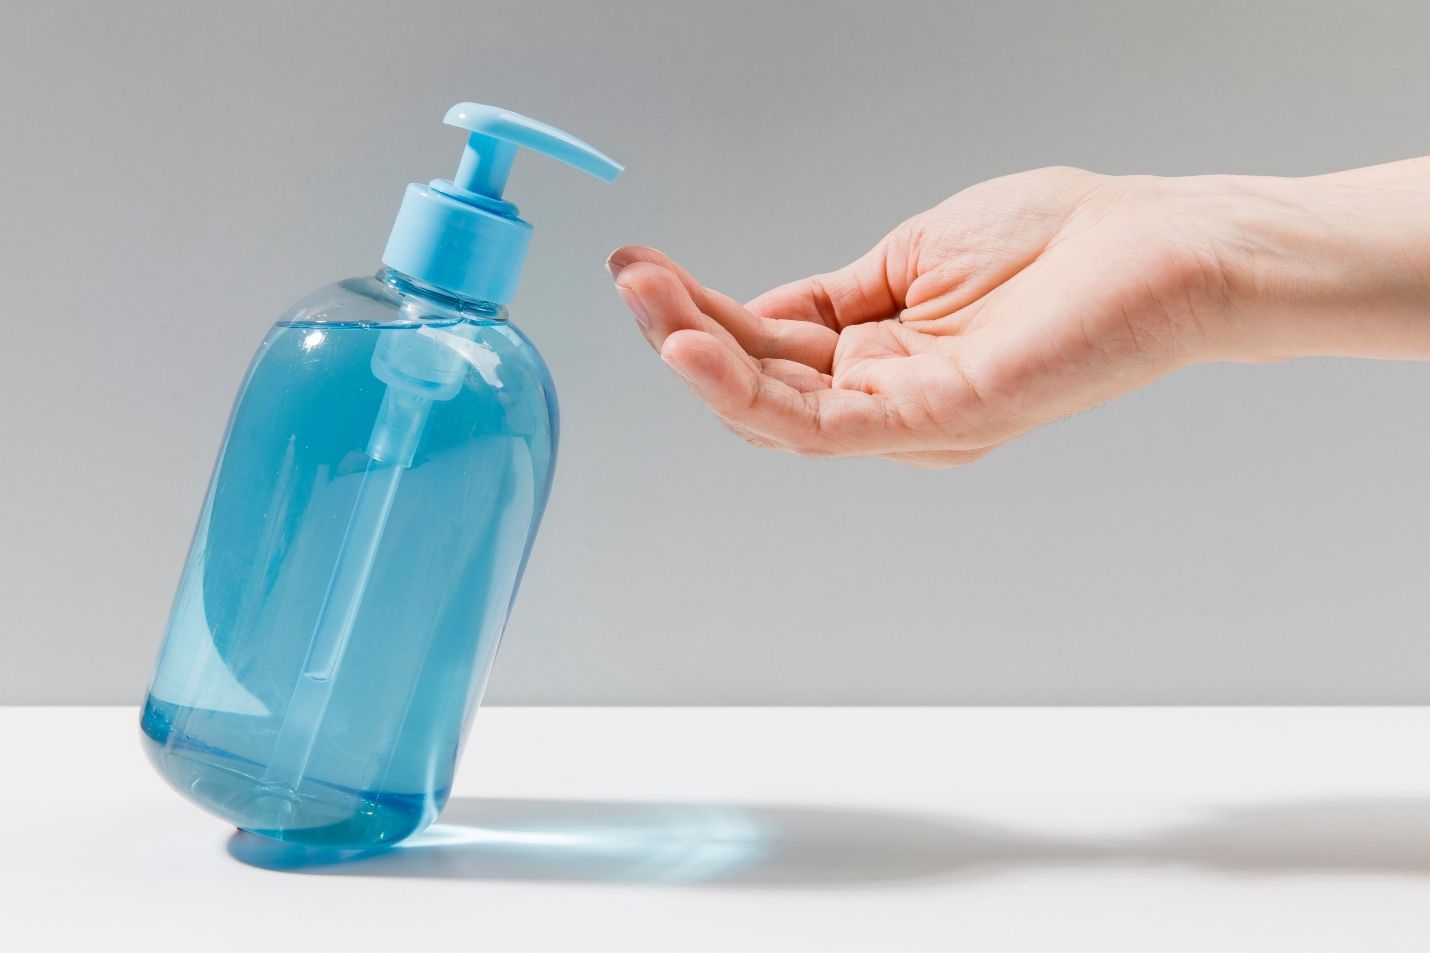 uses of a hand sanitizer